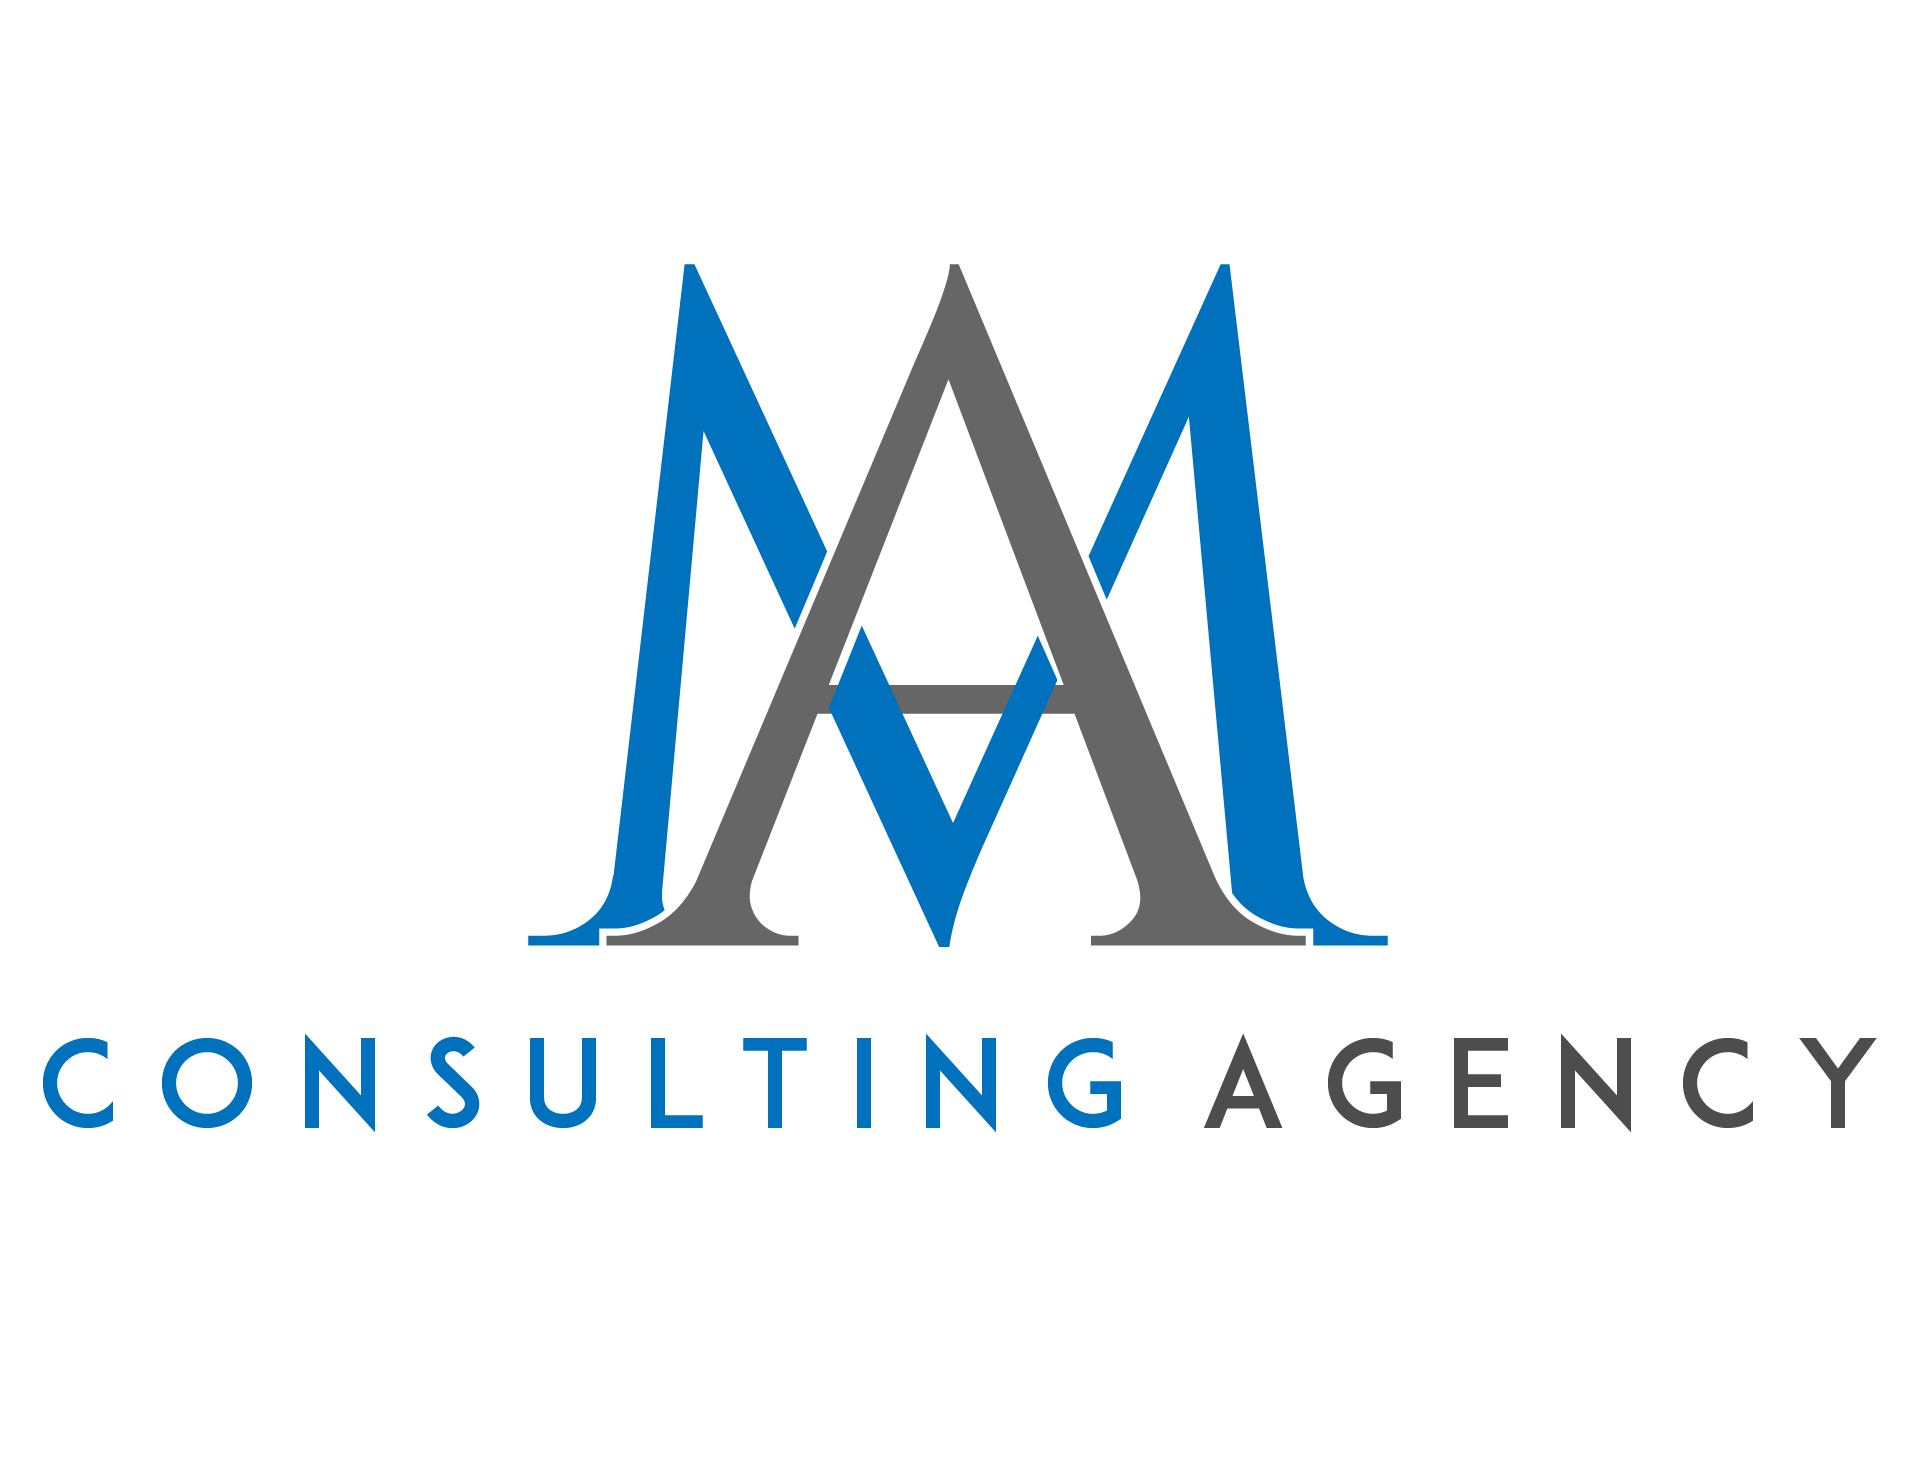 A&M Consulting Agency